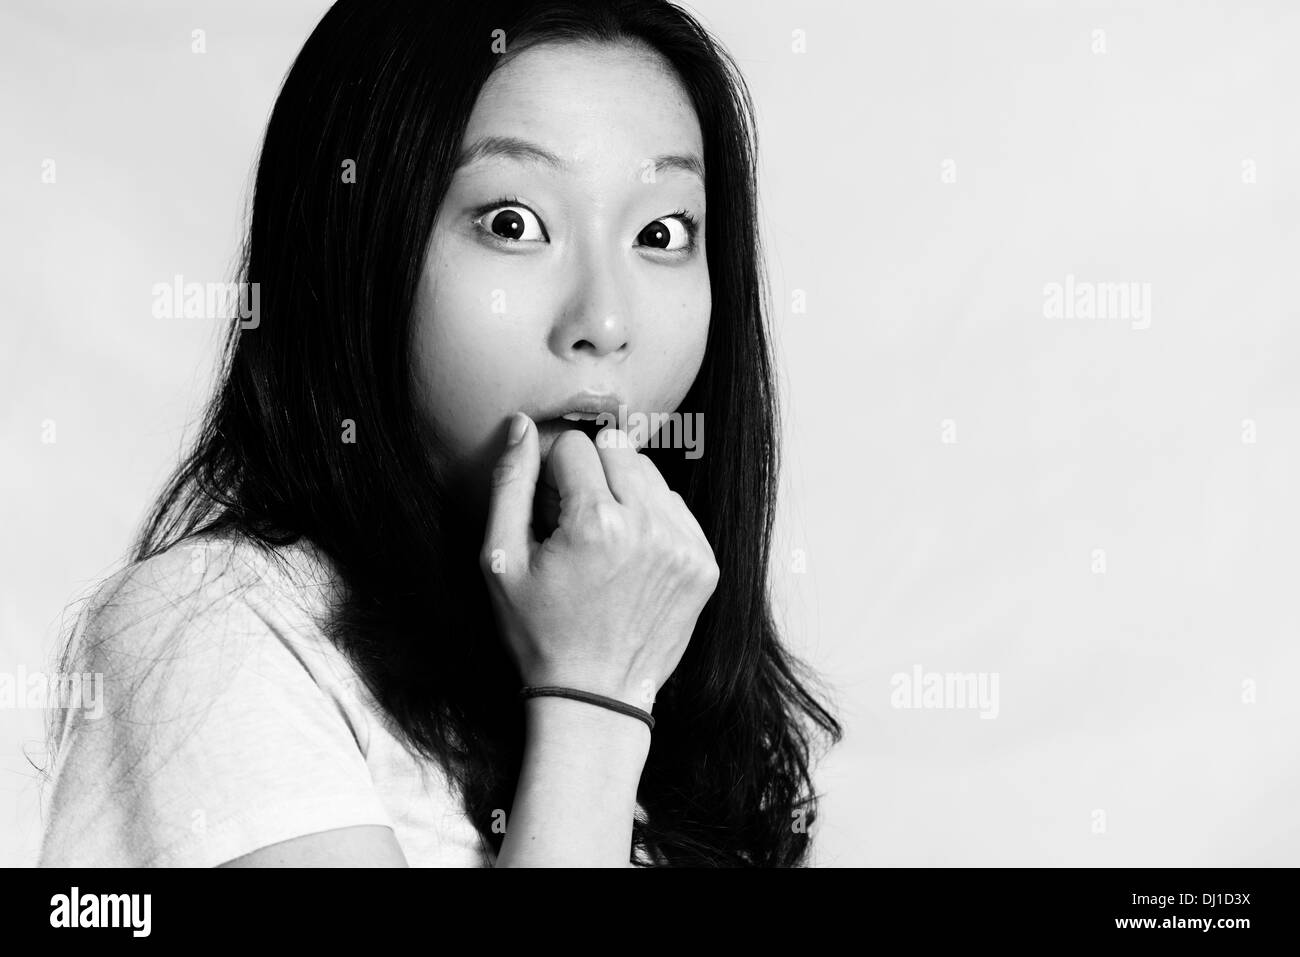 Portrait of young woman looking shocked and covering her mouth, black and white style Stock Photo